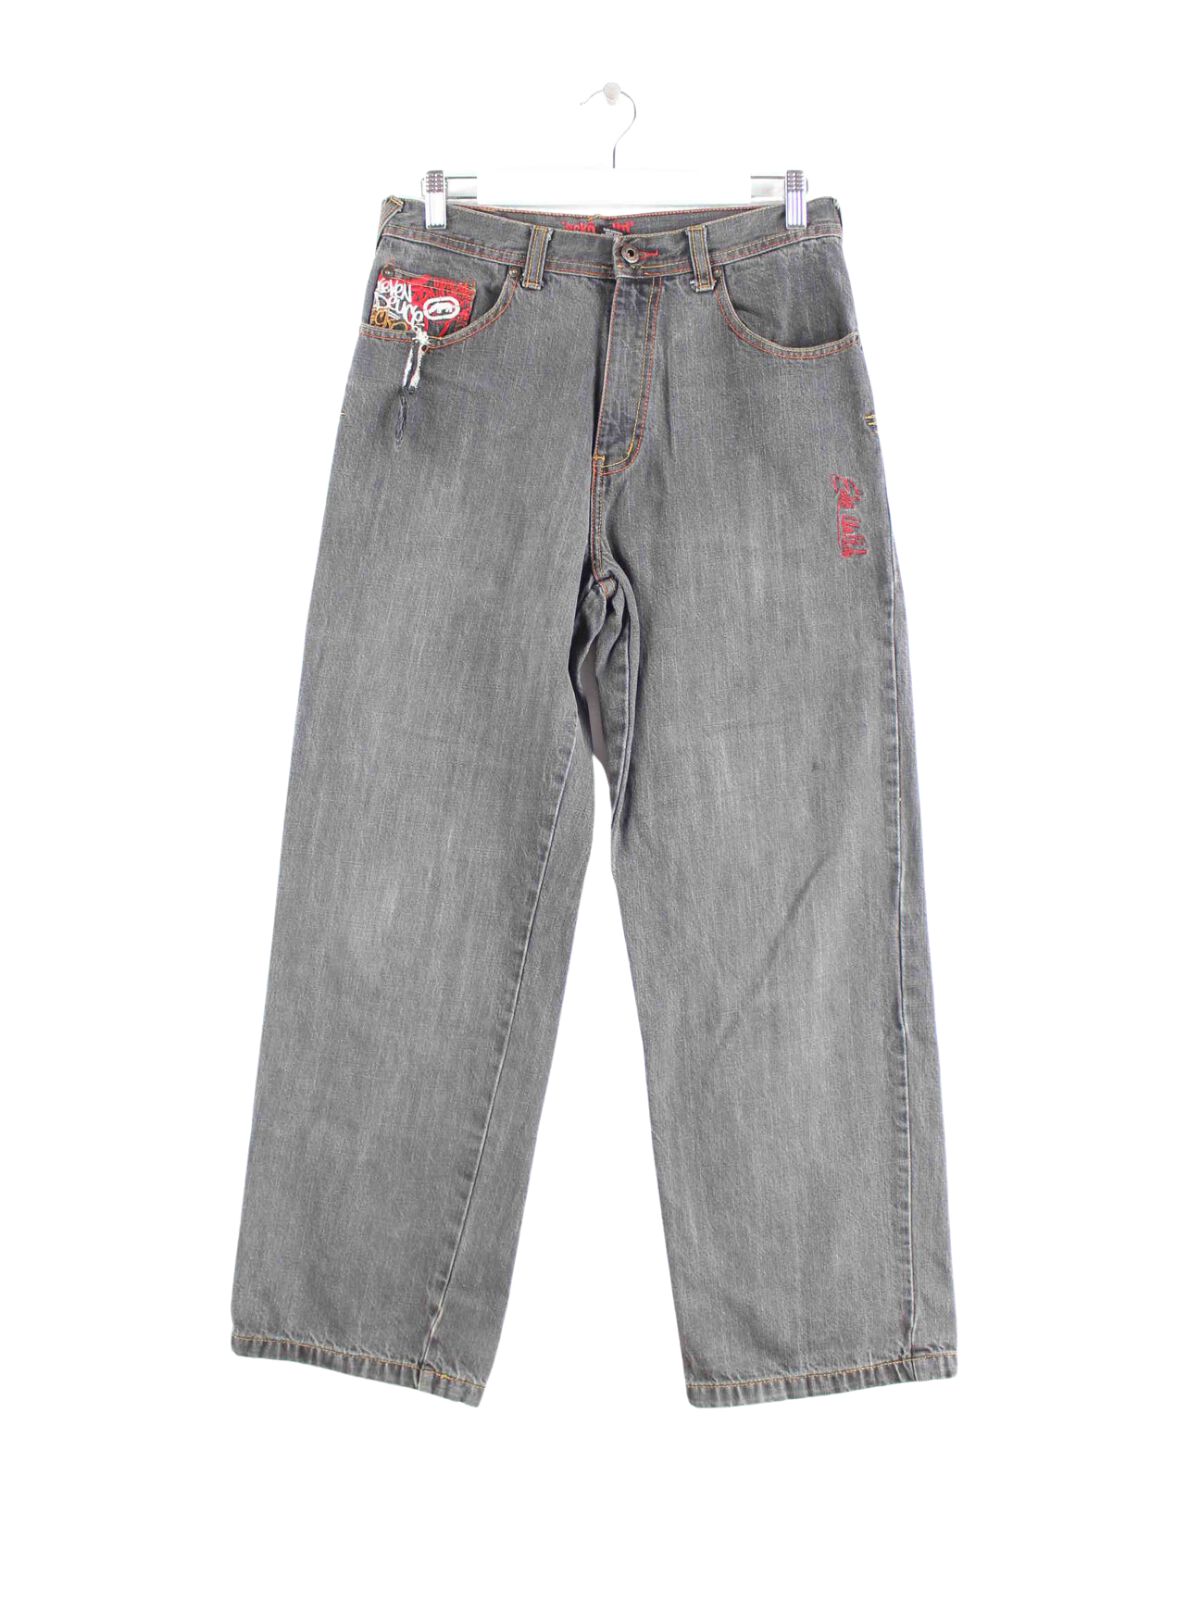 Ecko y2k Embroidered Jeans Grau W28 L30 (front image)